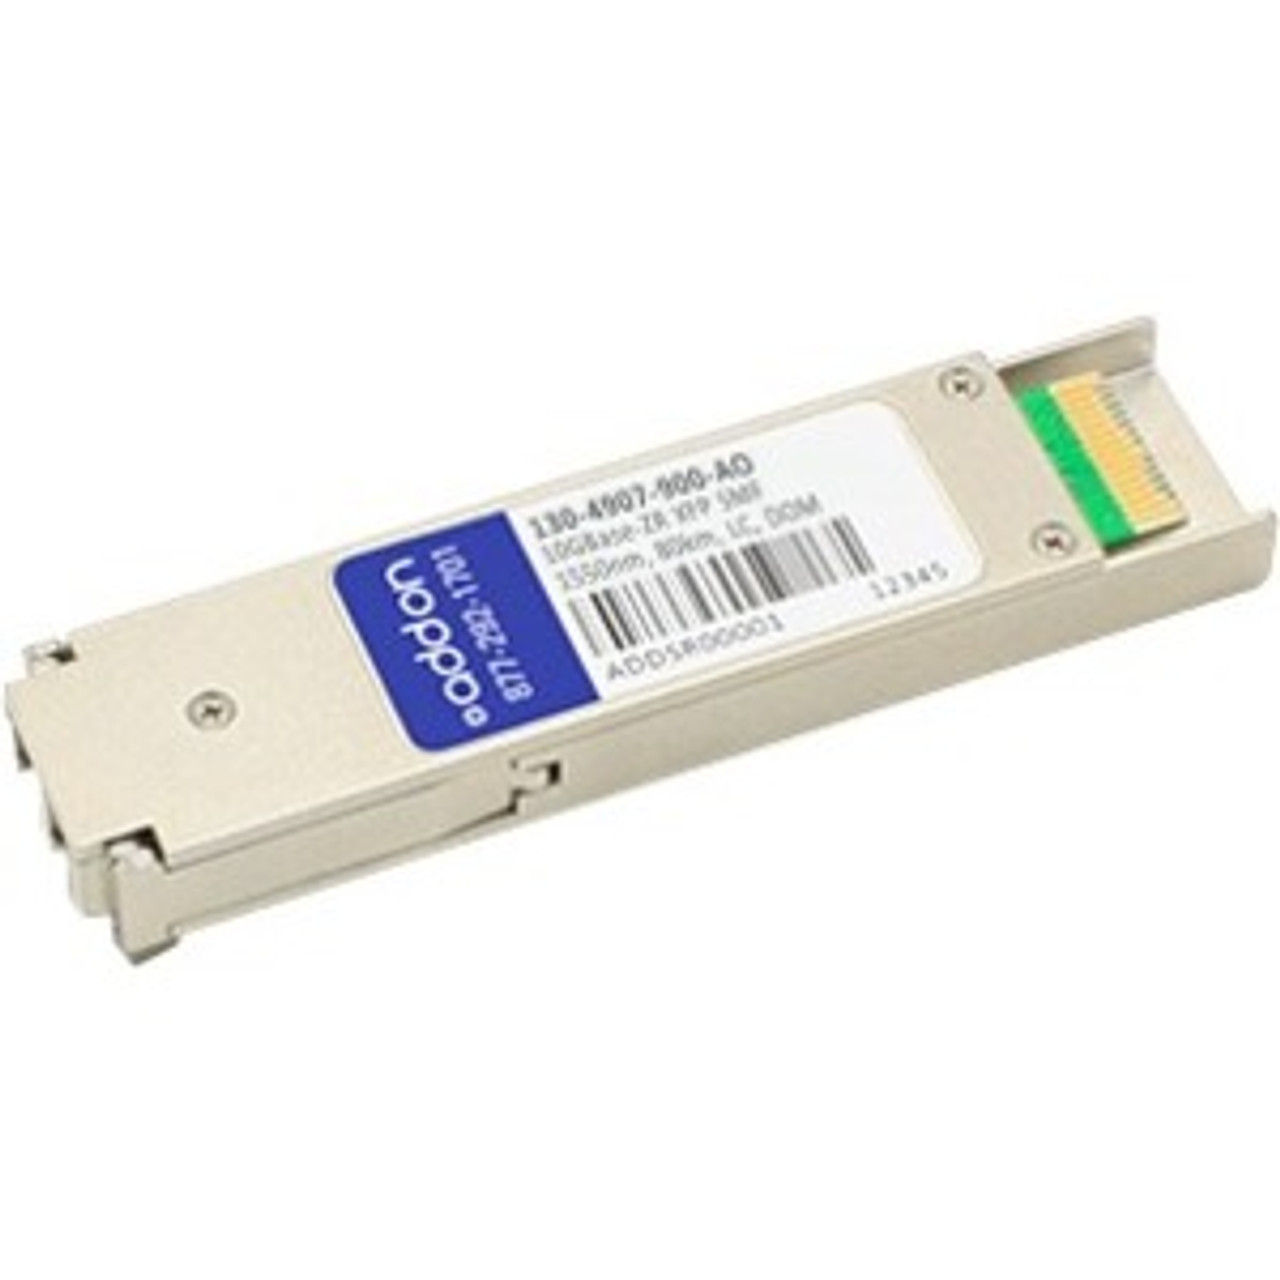 130-4907-900-AO AddOn 10Gbps 10GBase-ZR Single-mode Fiber 80km 1550nm LC Connector XFP Transceiver Module for Ciena Compatible